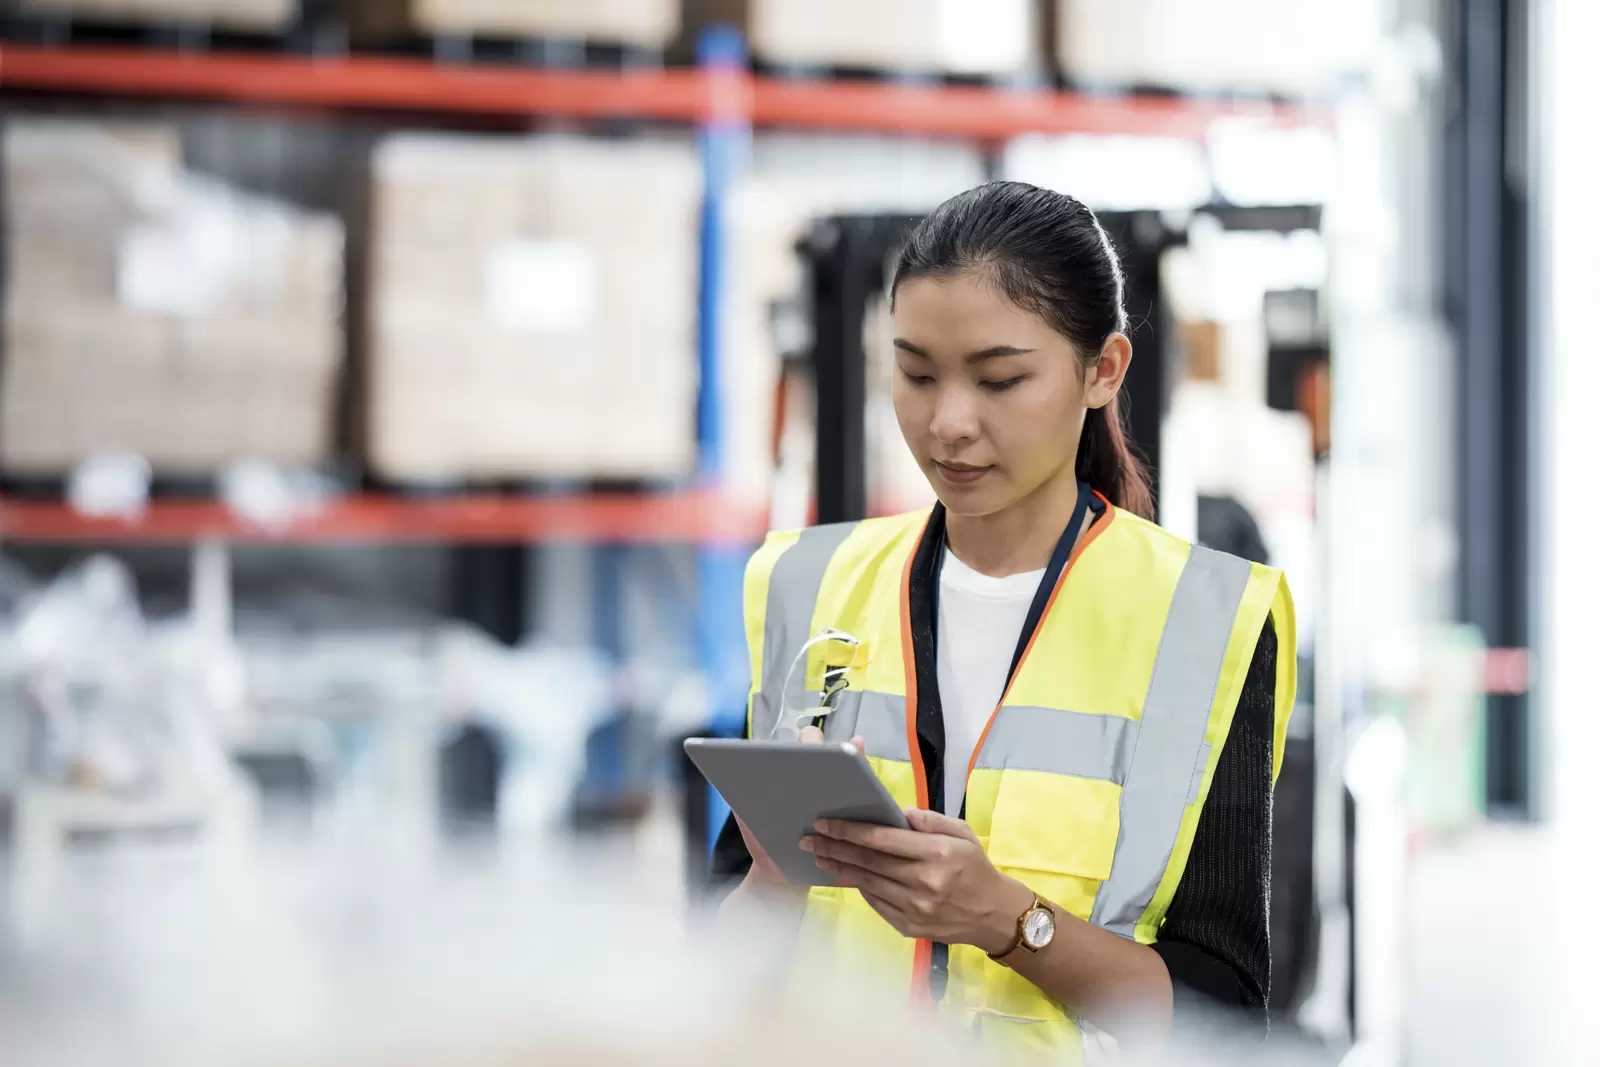 Days of Inventory on Hand in Distribution Warehouse. Asian Female Inventory Control staff using a digital tablet to inventory check real-time and report inventory while making recommendations on which items to order and restock.